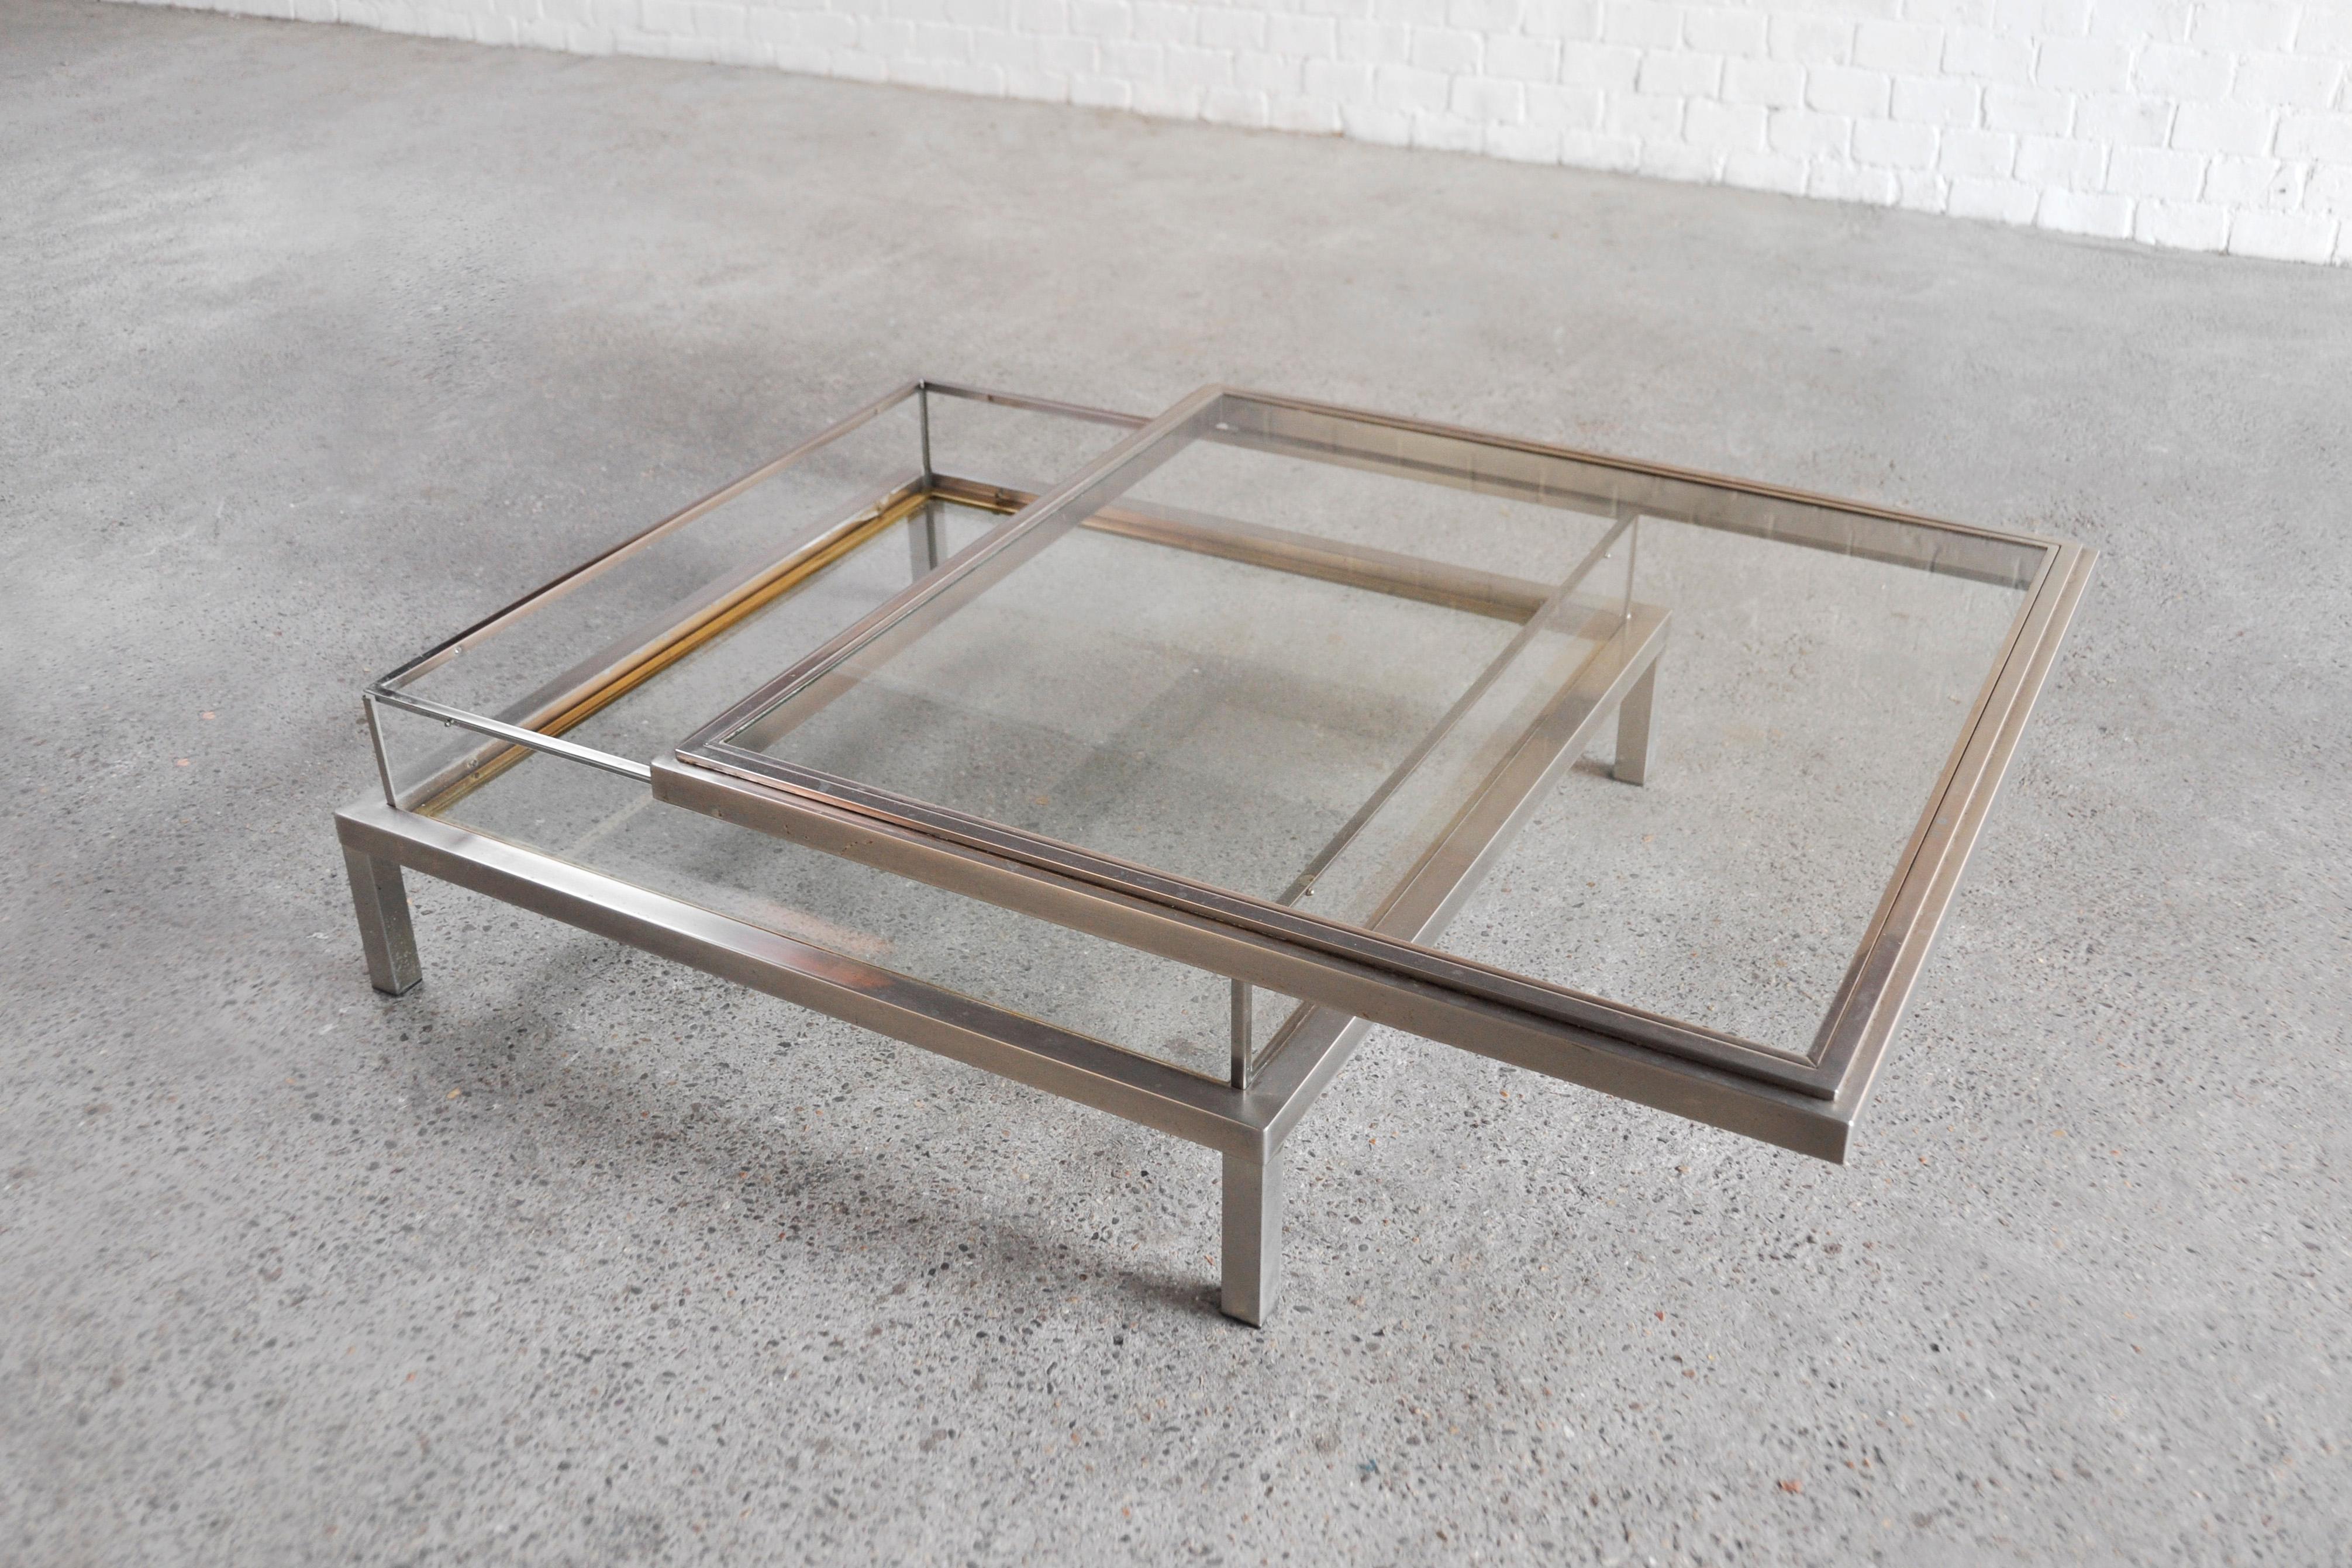 French Vintage Chrome and Brass Sliding Coffee Table from Maison Jansen, France, 1970s